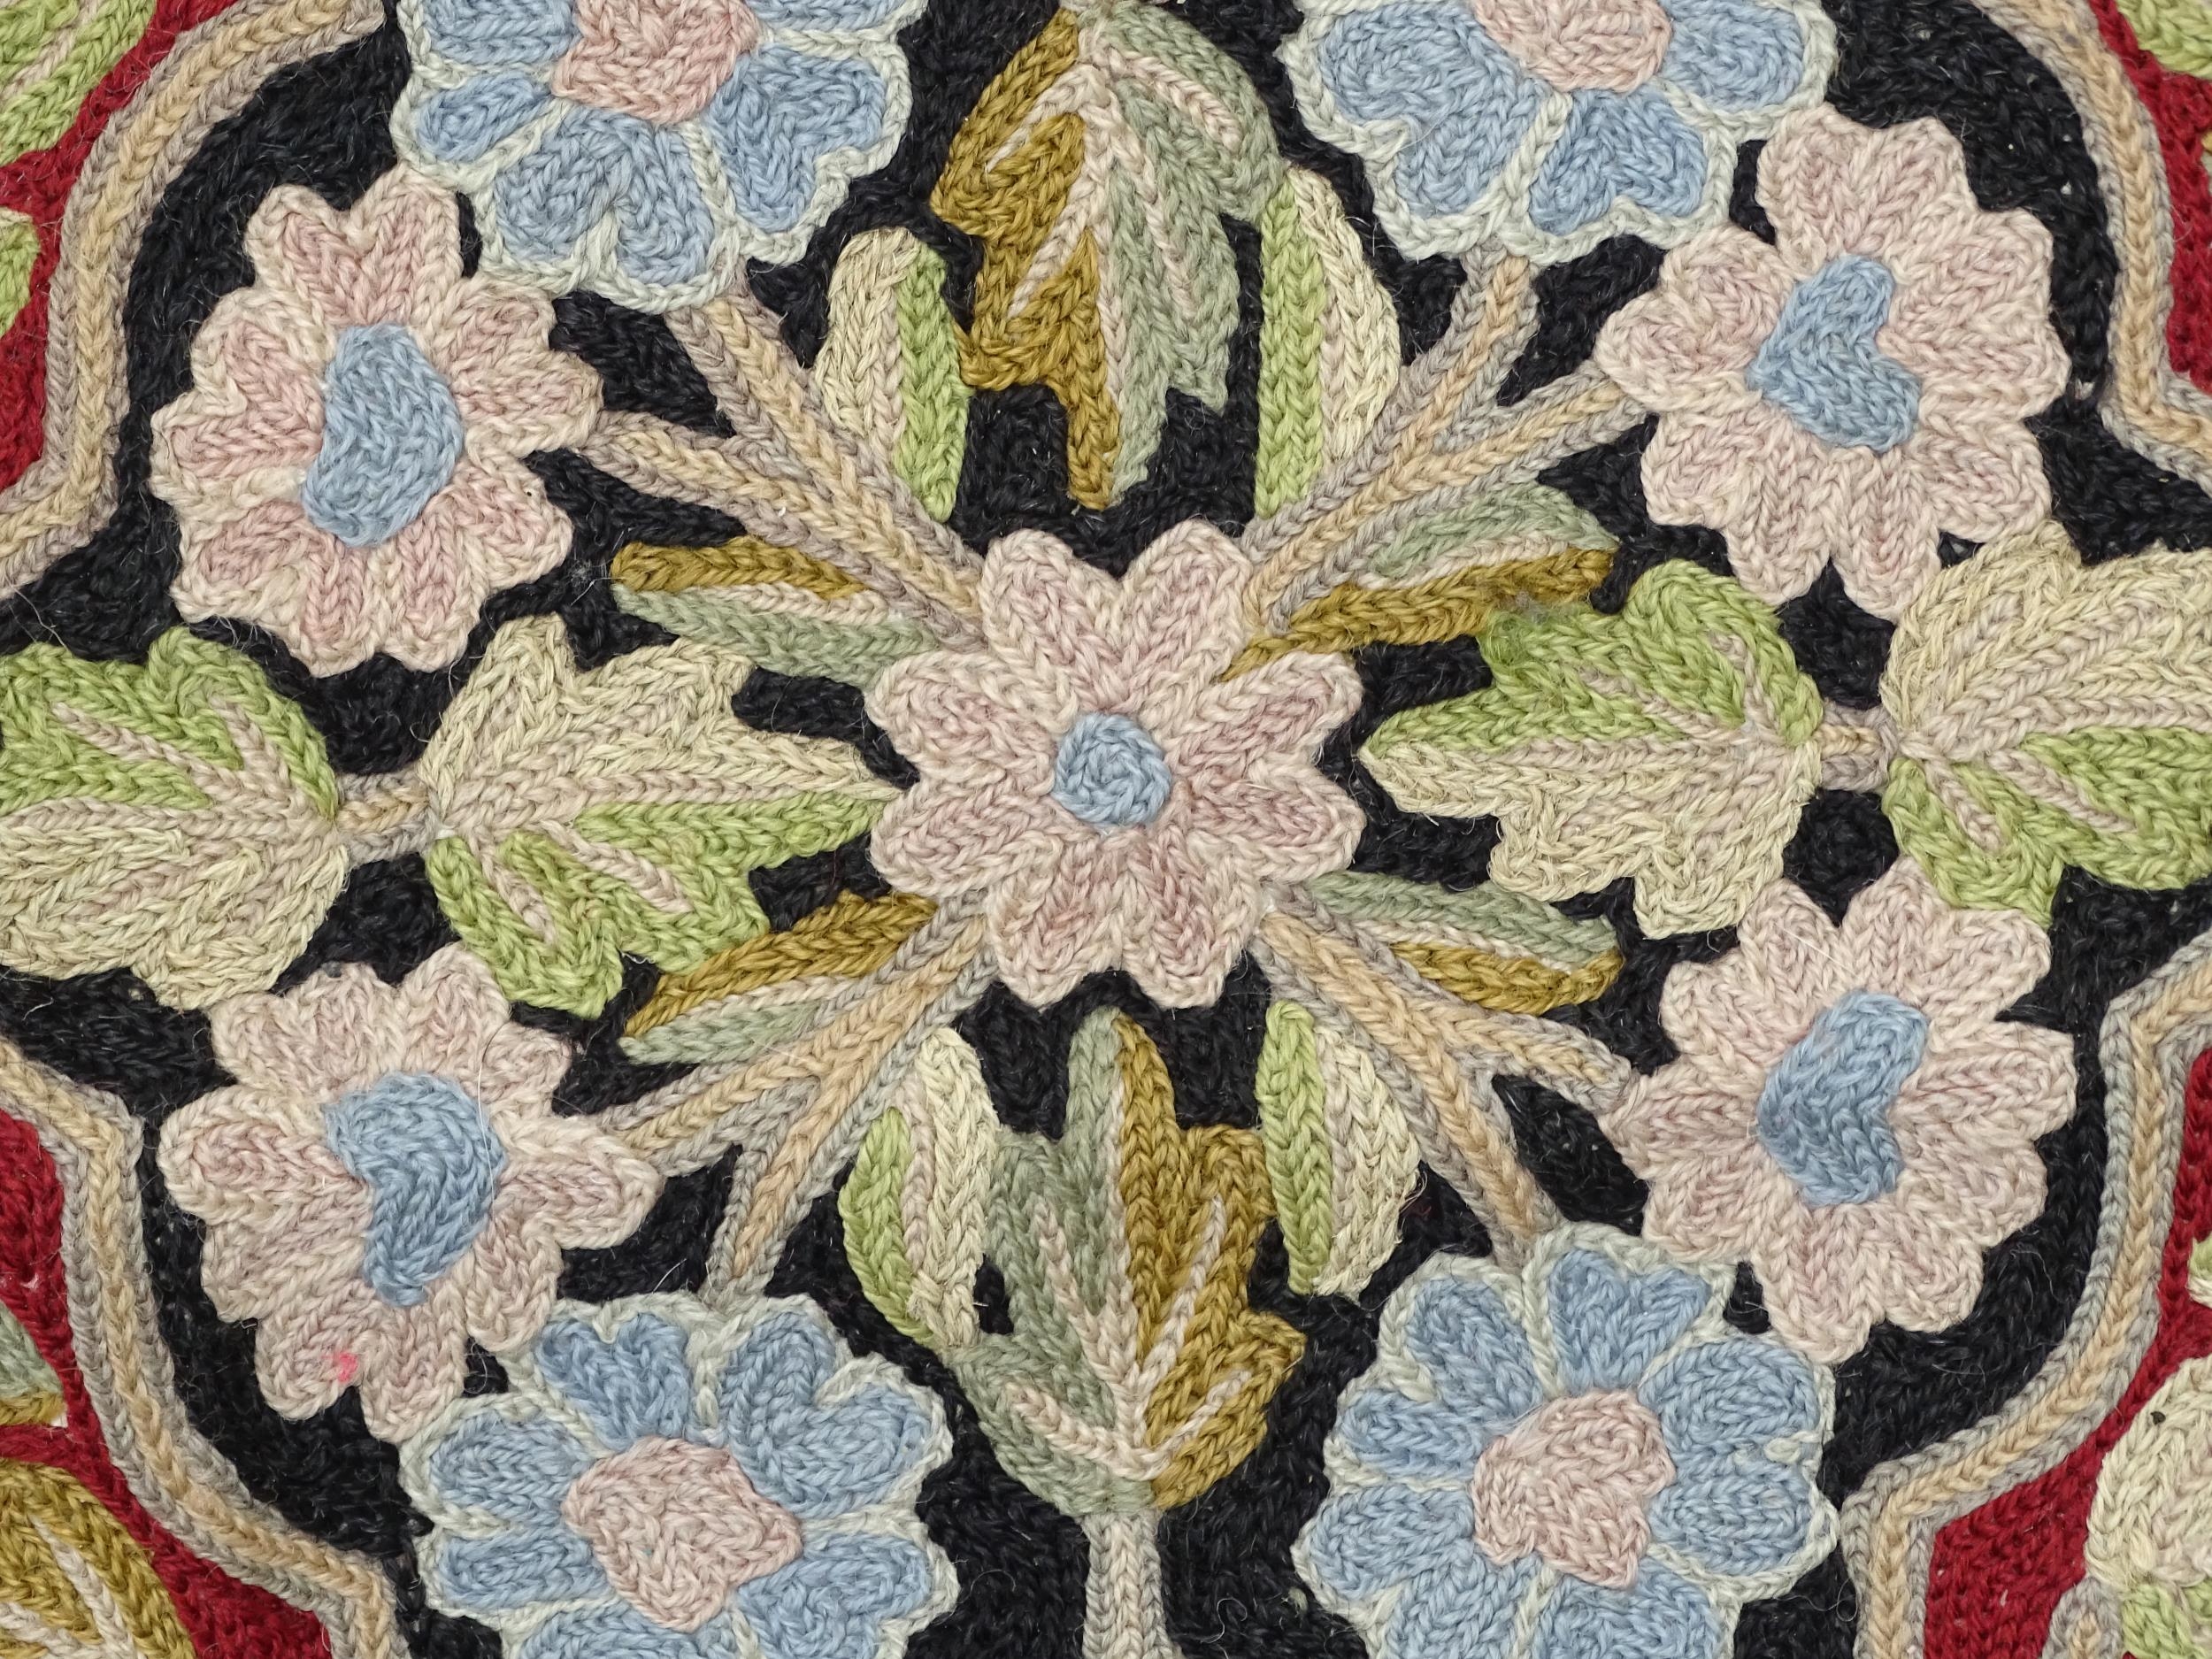 Carpet / Rug : A black and red ground rug with floral and foliate detail. Approx. 35" x 24 1/2" - Image 5 of 7